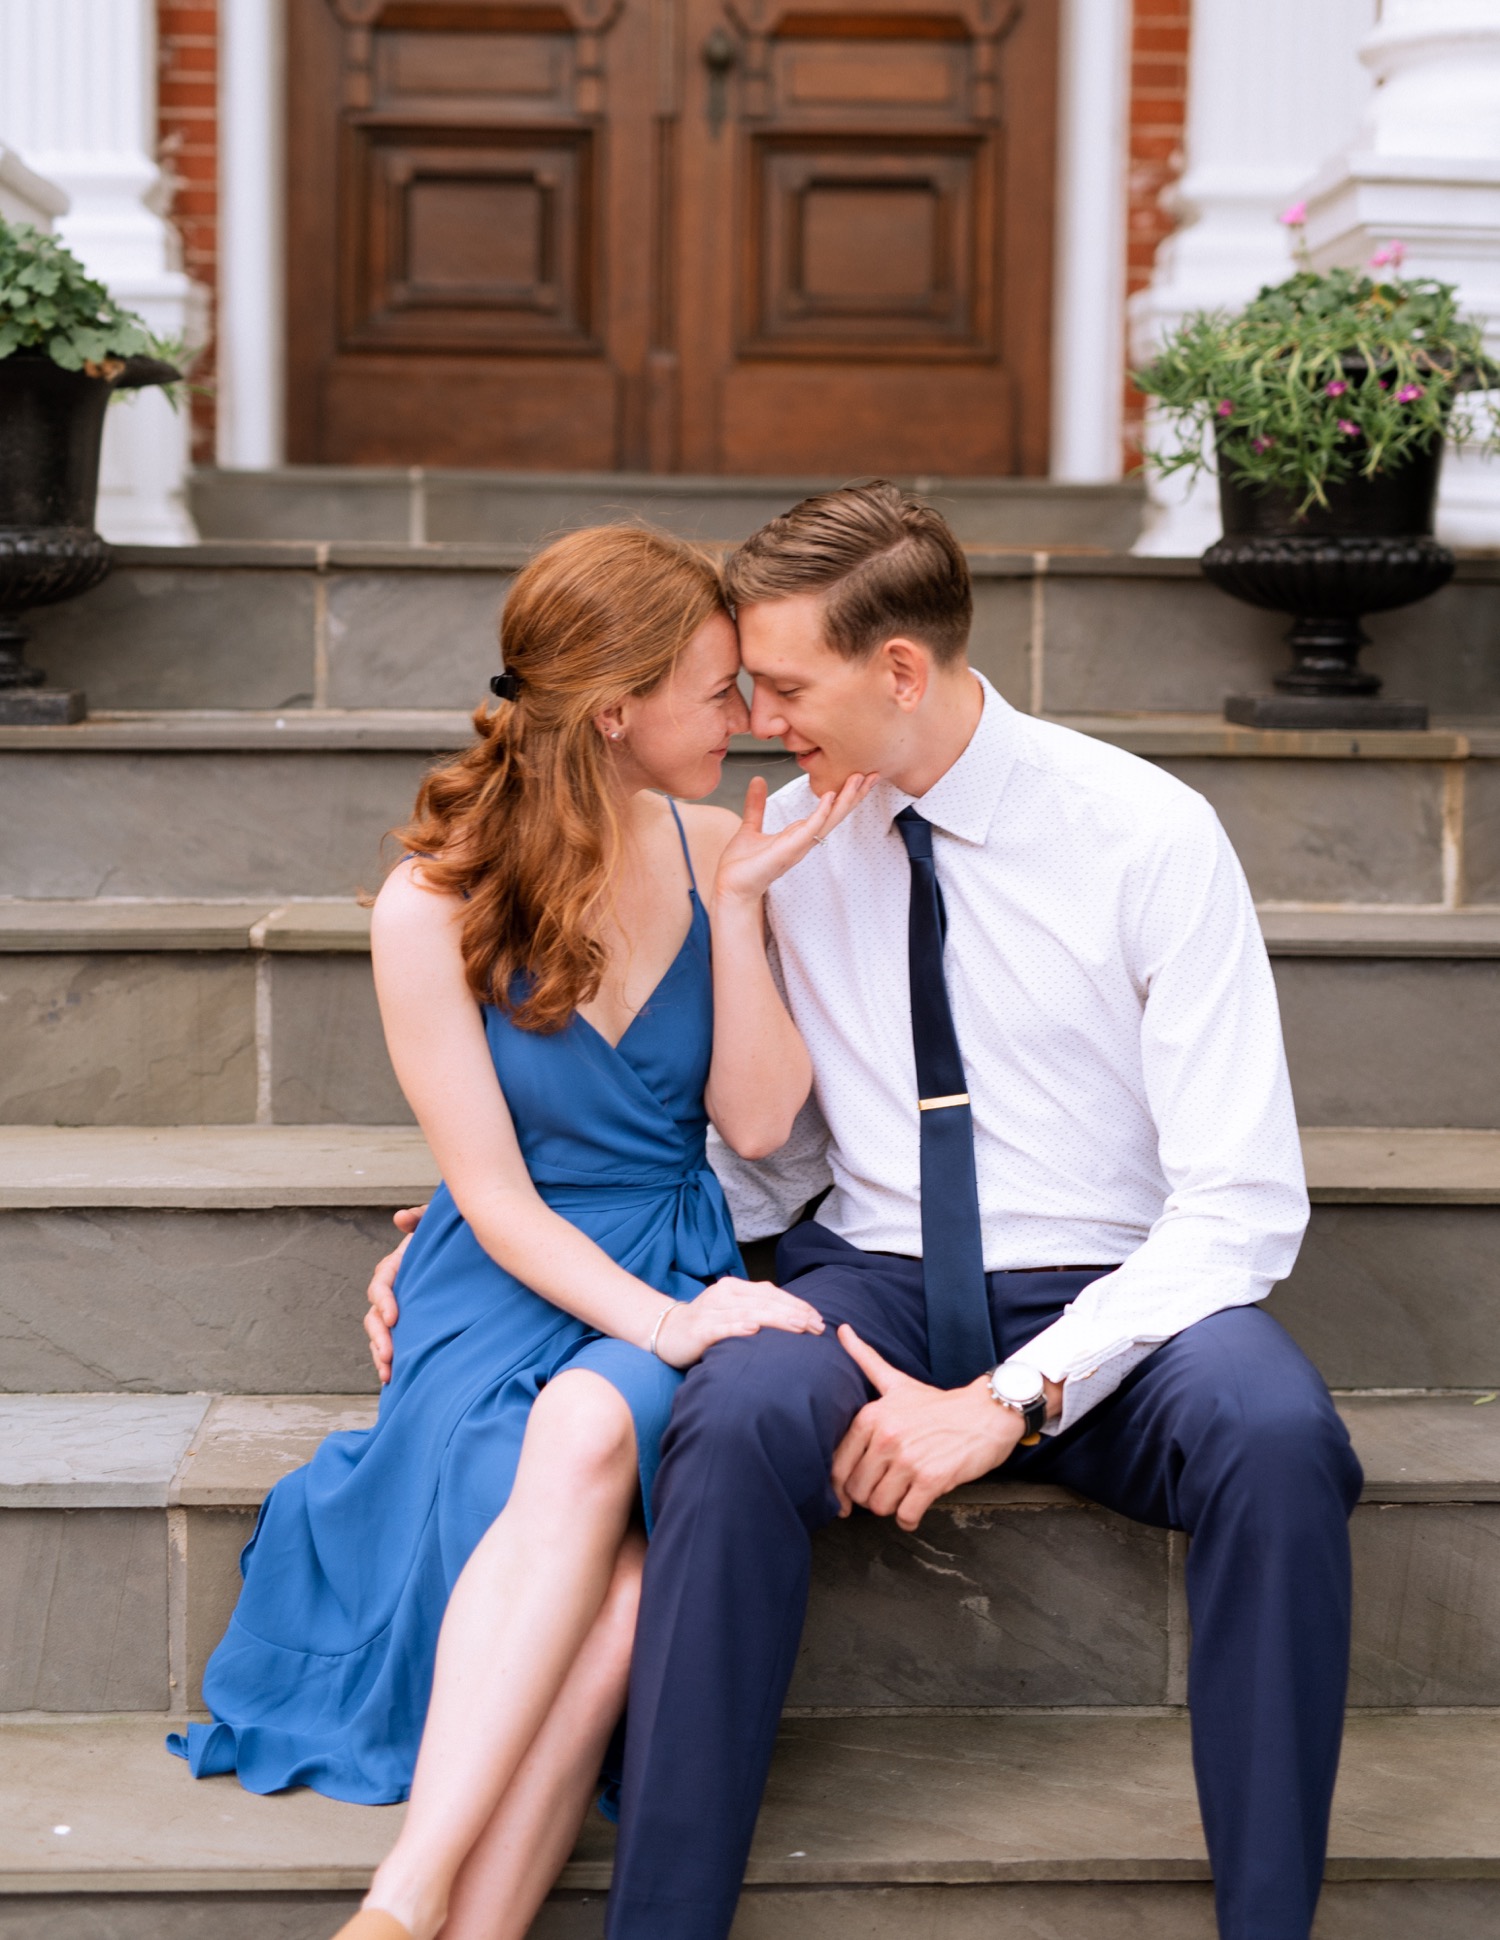 engaged couple hold each other close on staircase during engagement shoot in the freeman historic district in norfolk virginia